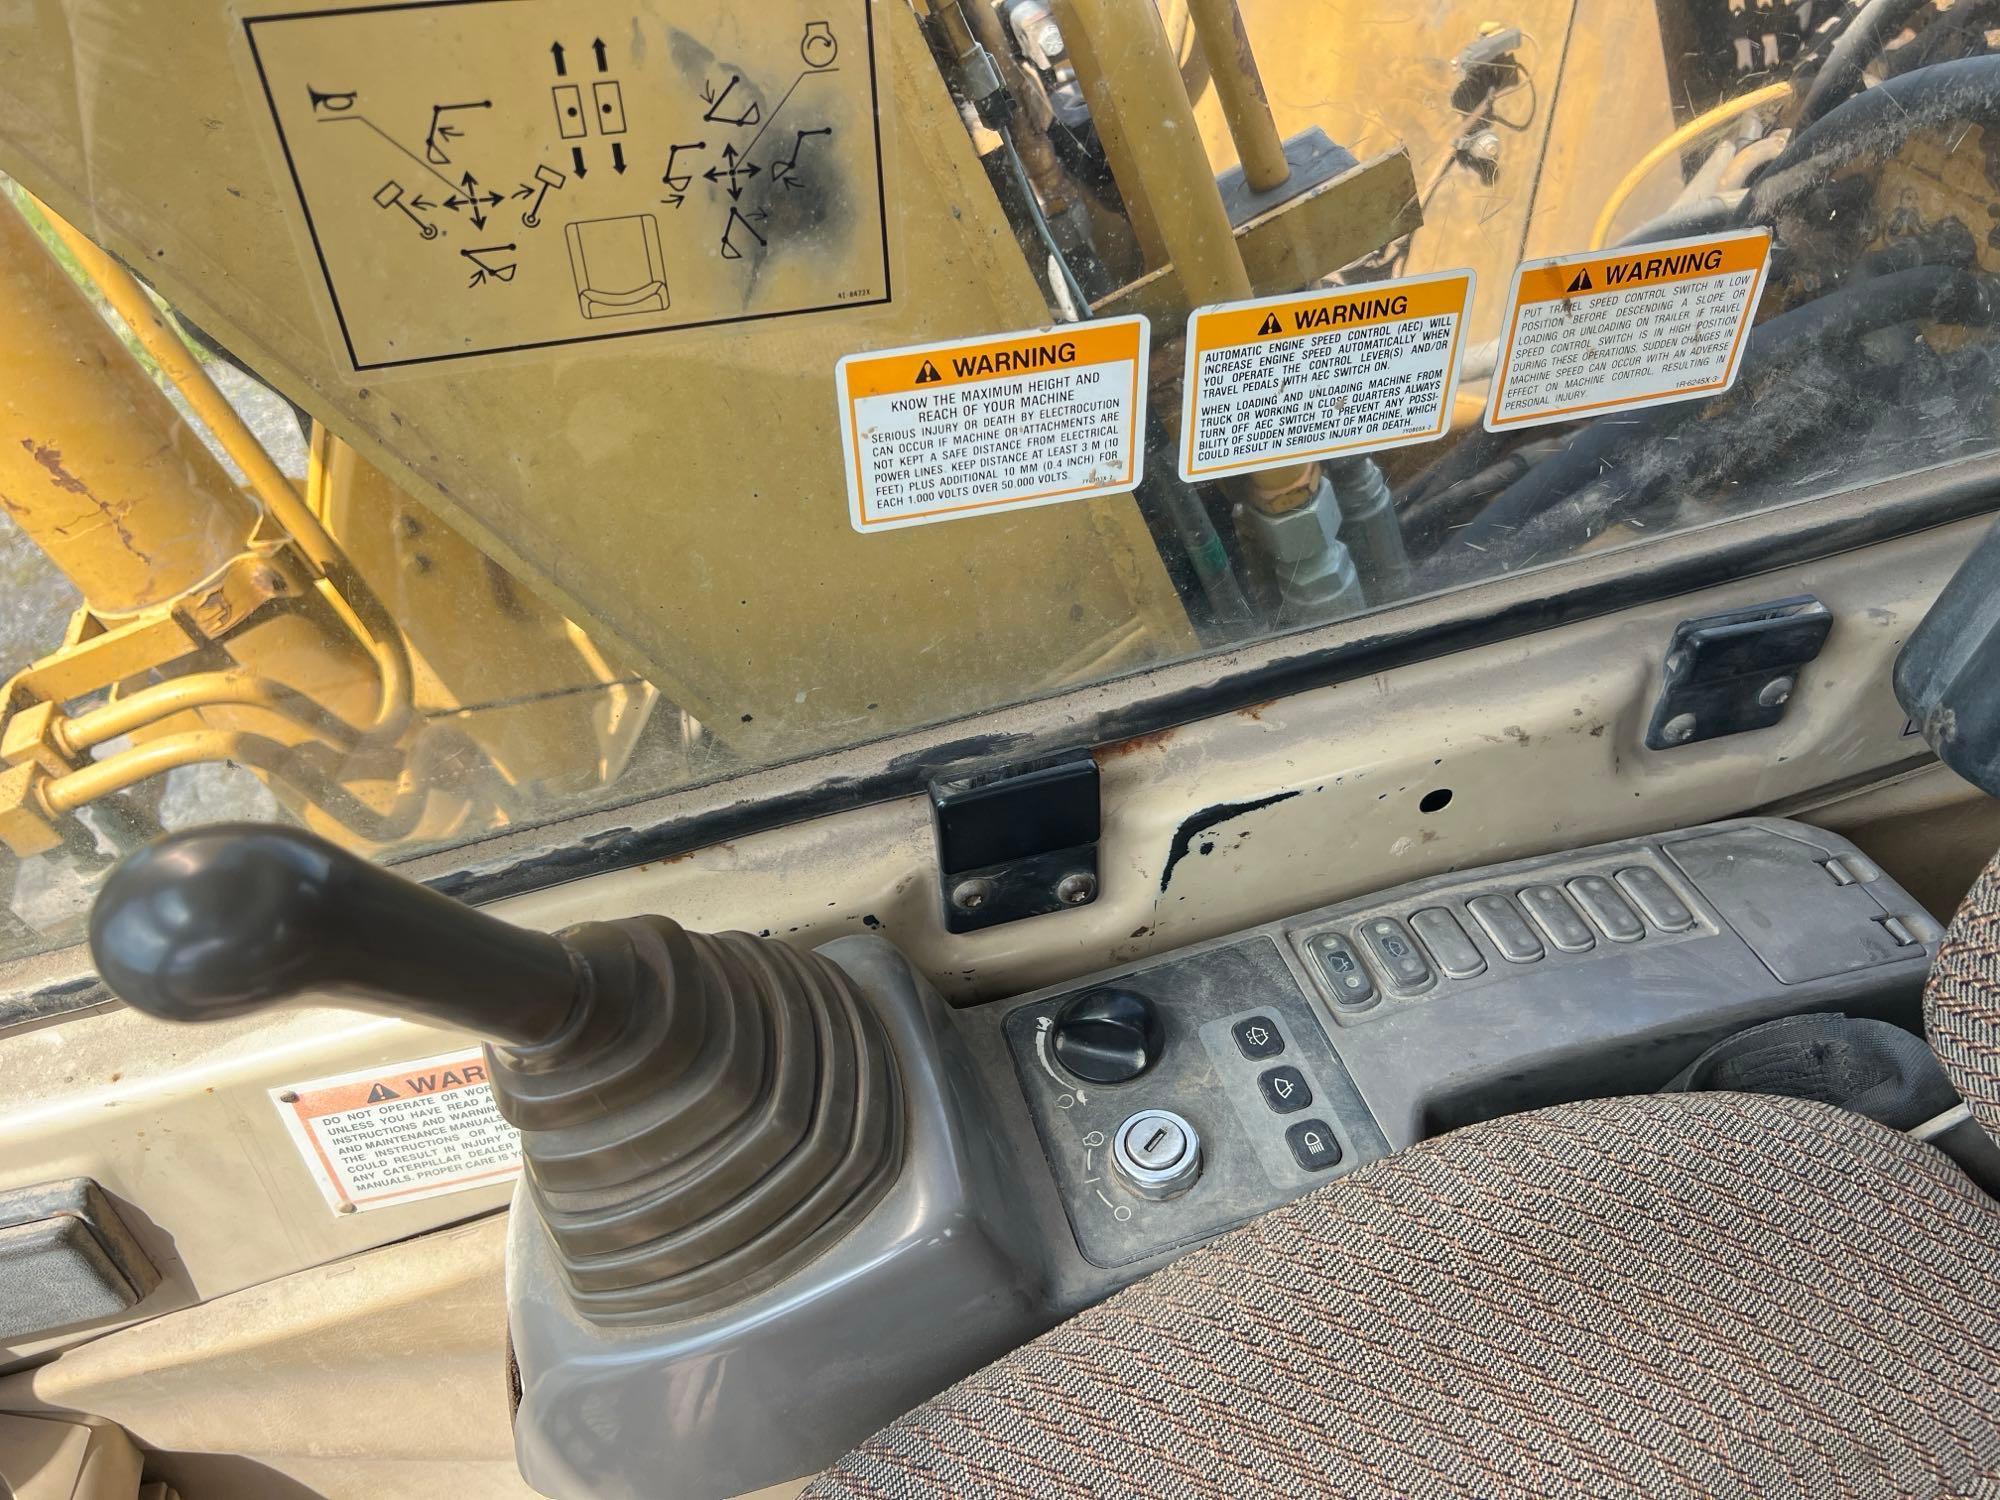 CAT 312BL HYDRAULIC EXCAVATOR SN:8JR01288 powered by Cat 3064T diesel engine, equipped with Cab,